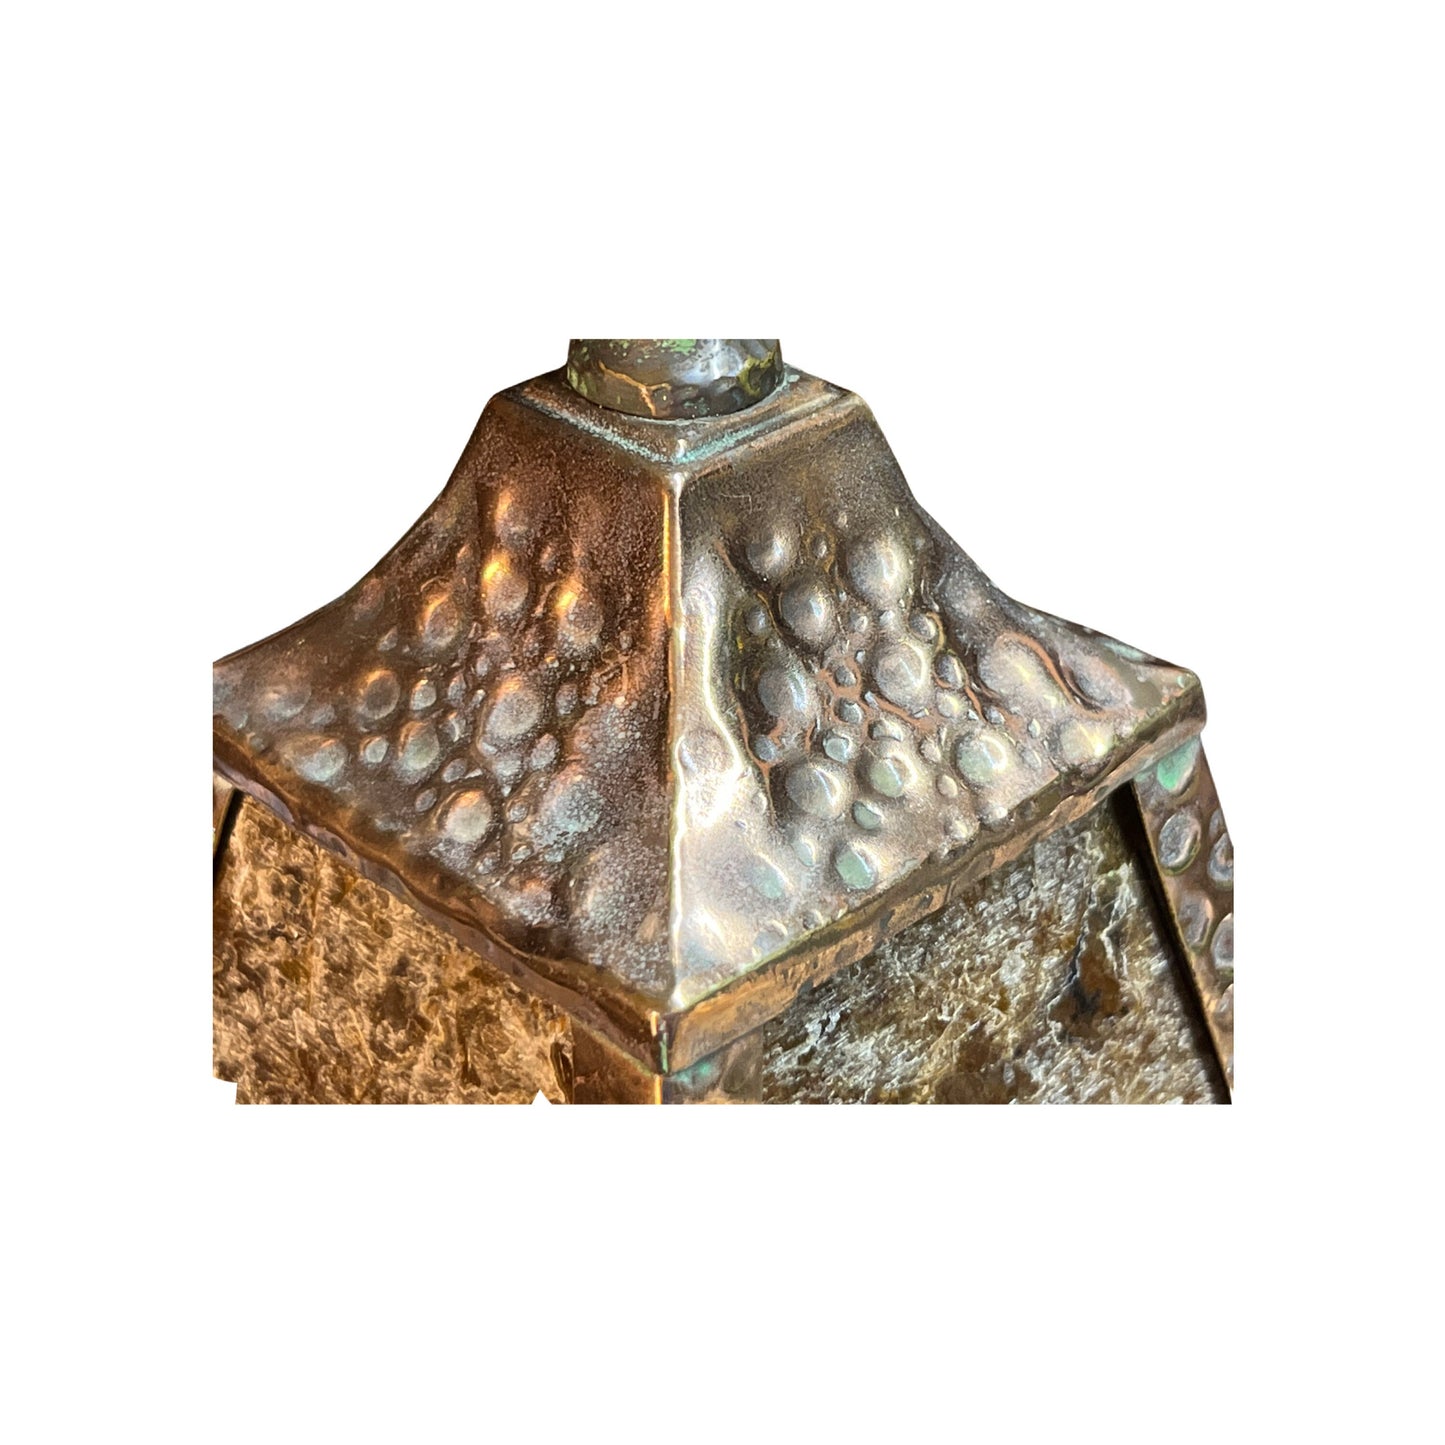 Antique Craftsman or Arts and Crafts Hammered Copper Plated Sconce with Mica Panels for a Bungalow Restored Ready to Install Free Shipping